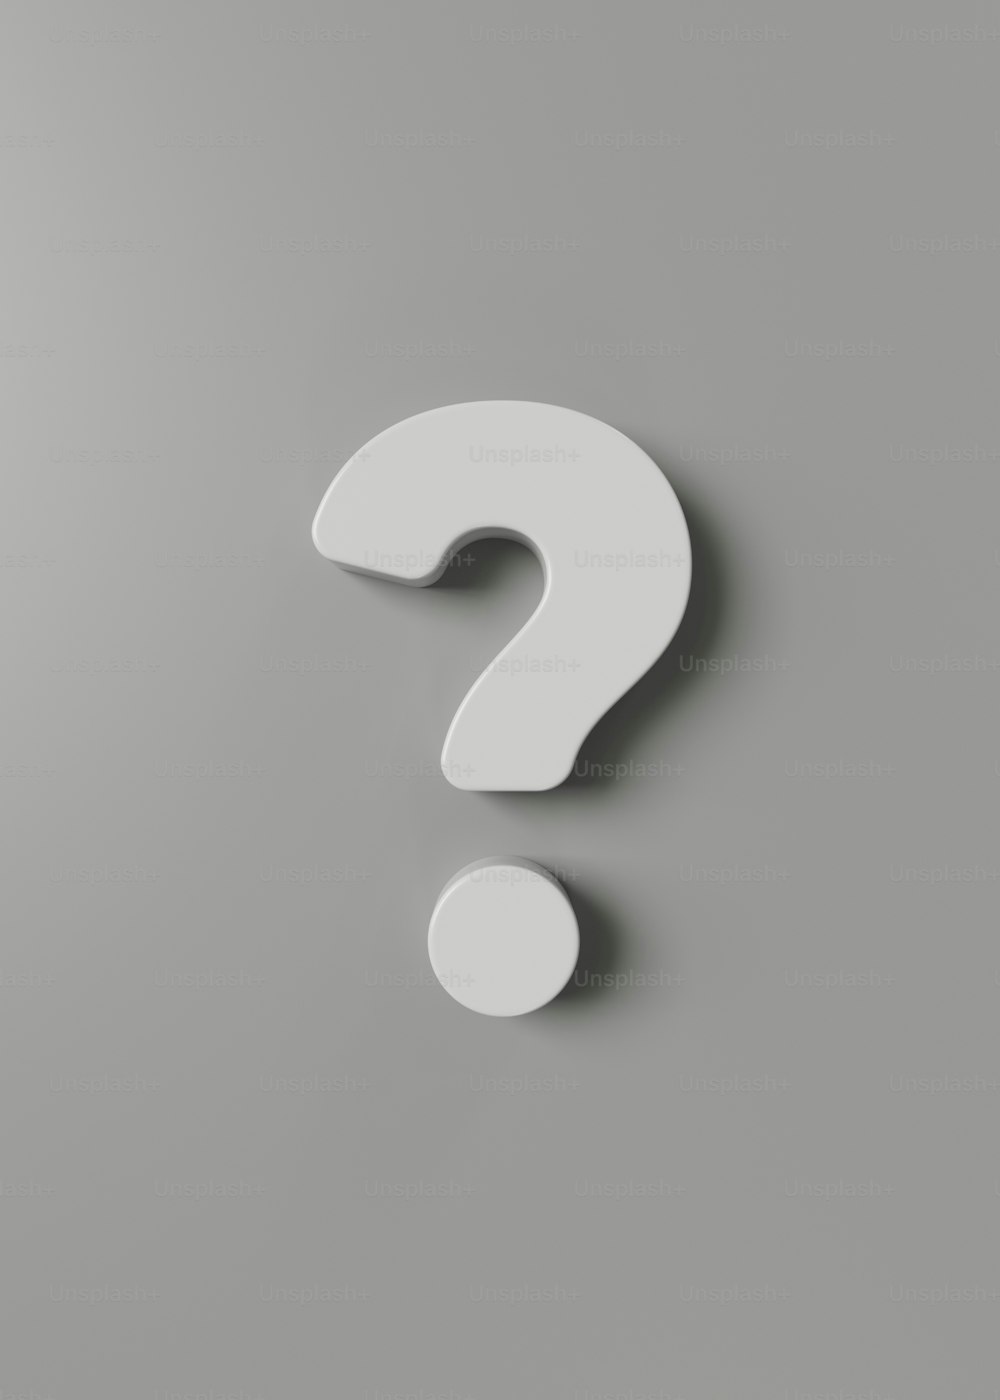 a white question mark on a gray background